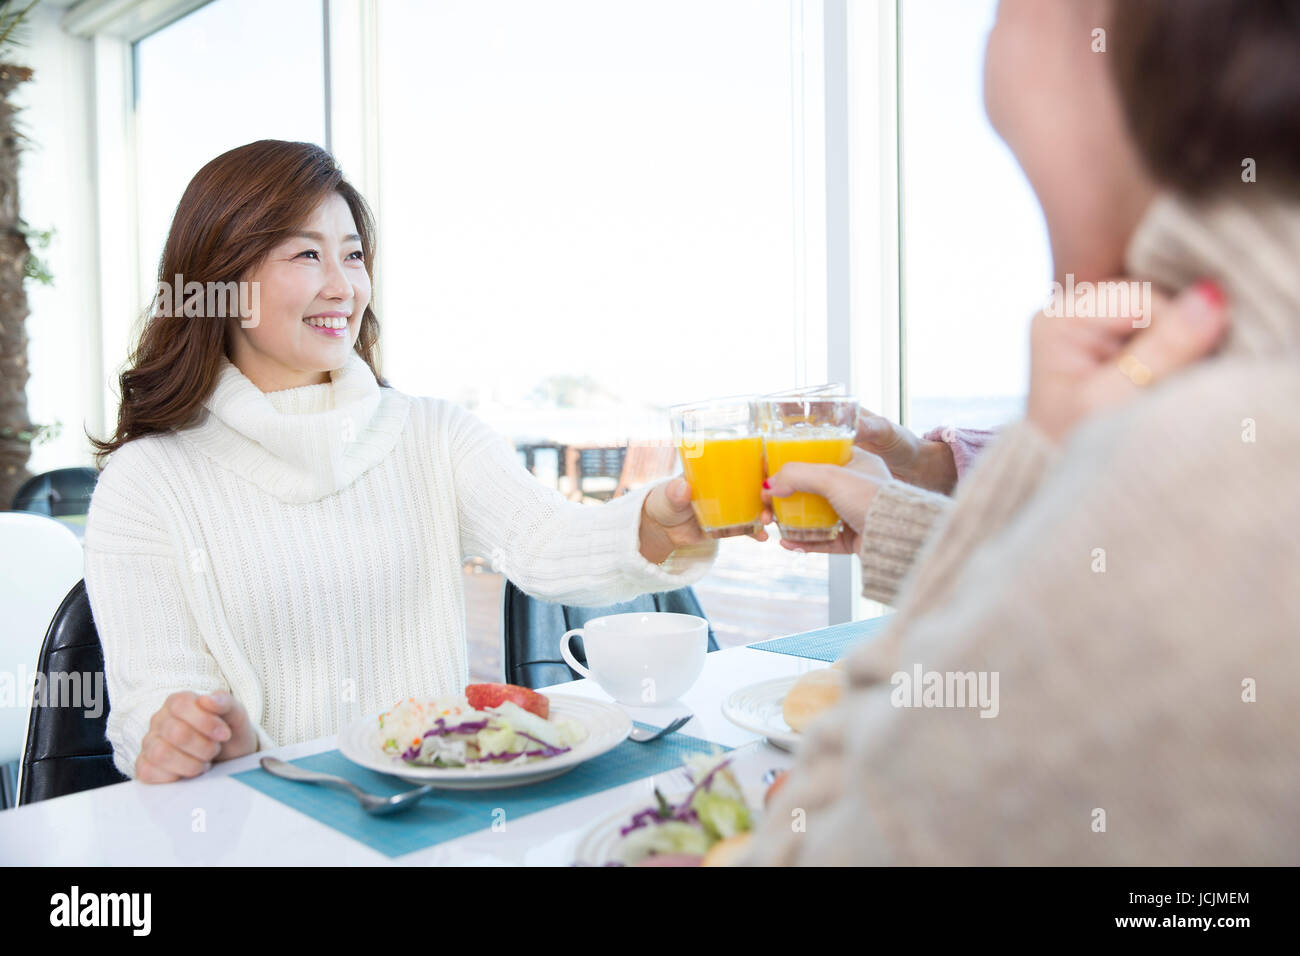 Portrait of smiling middle aged women at buffet Stock Photo